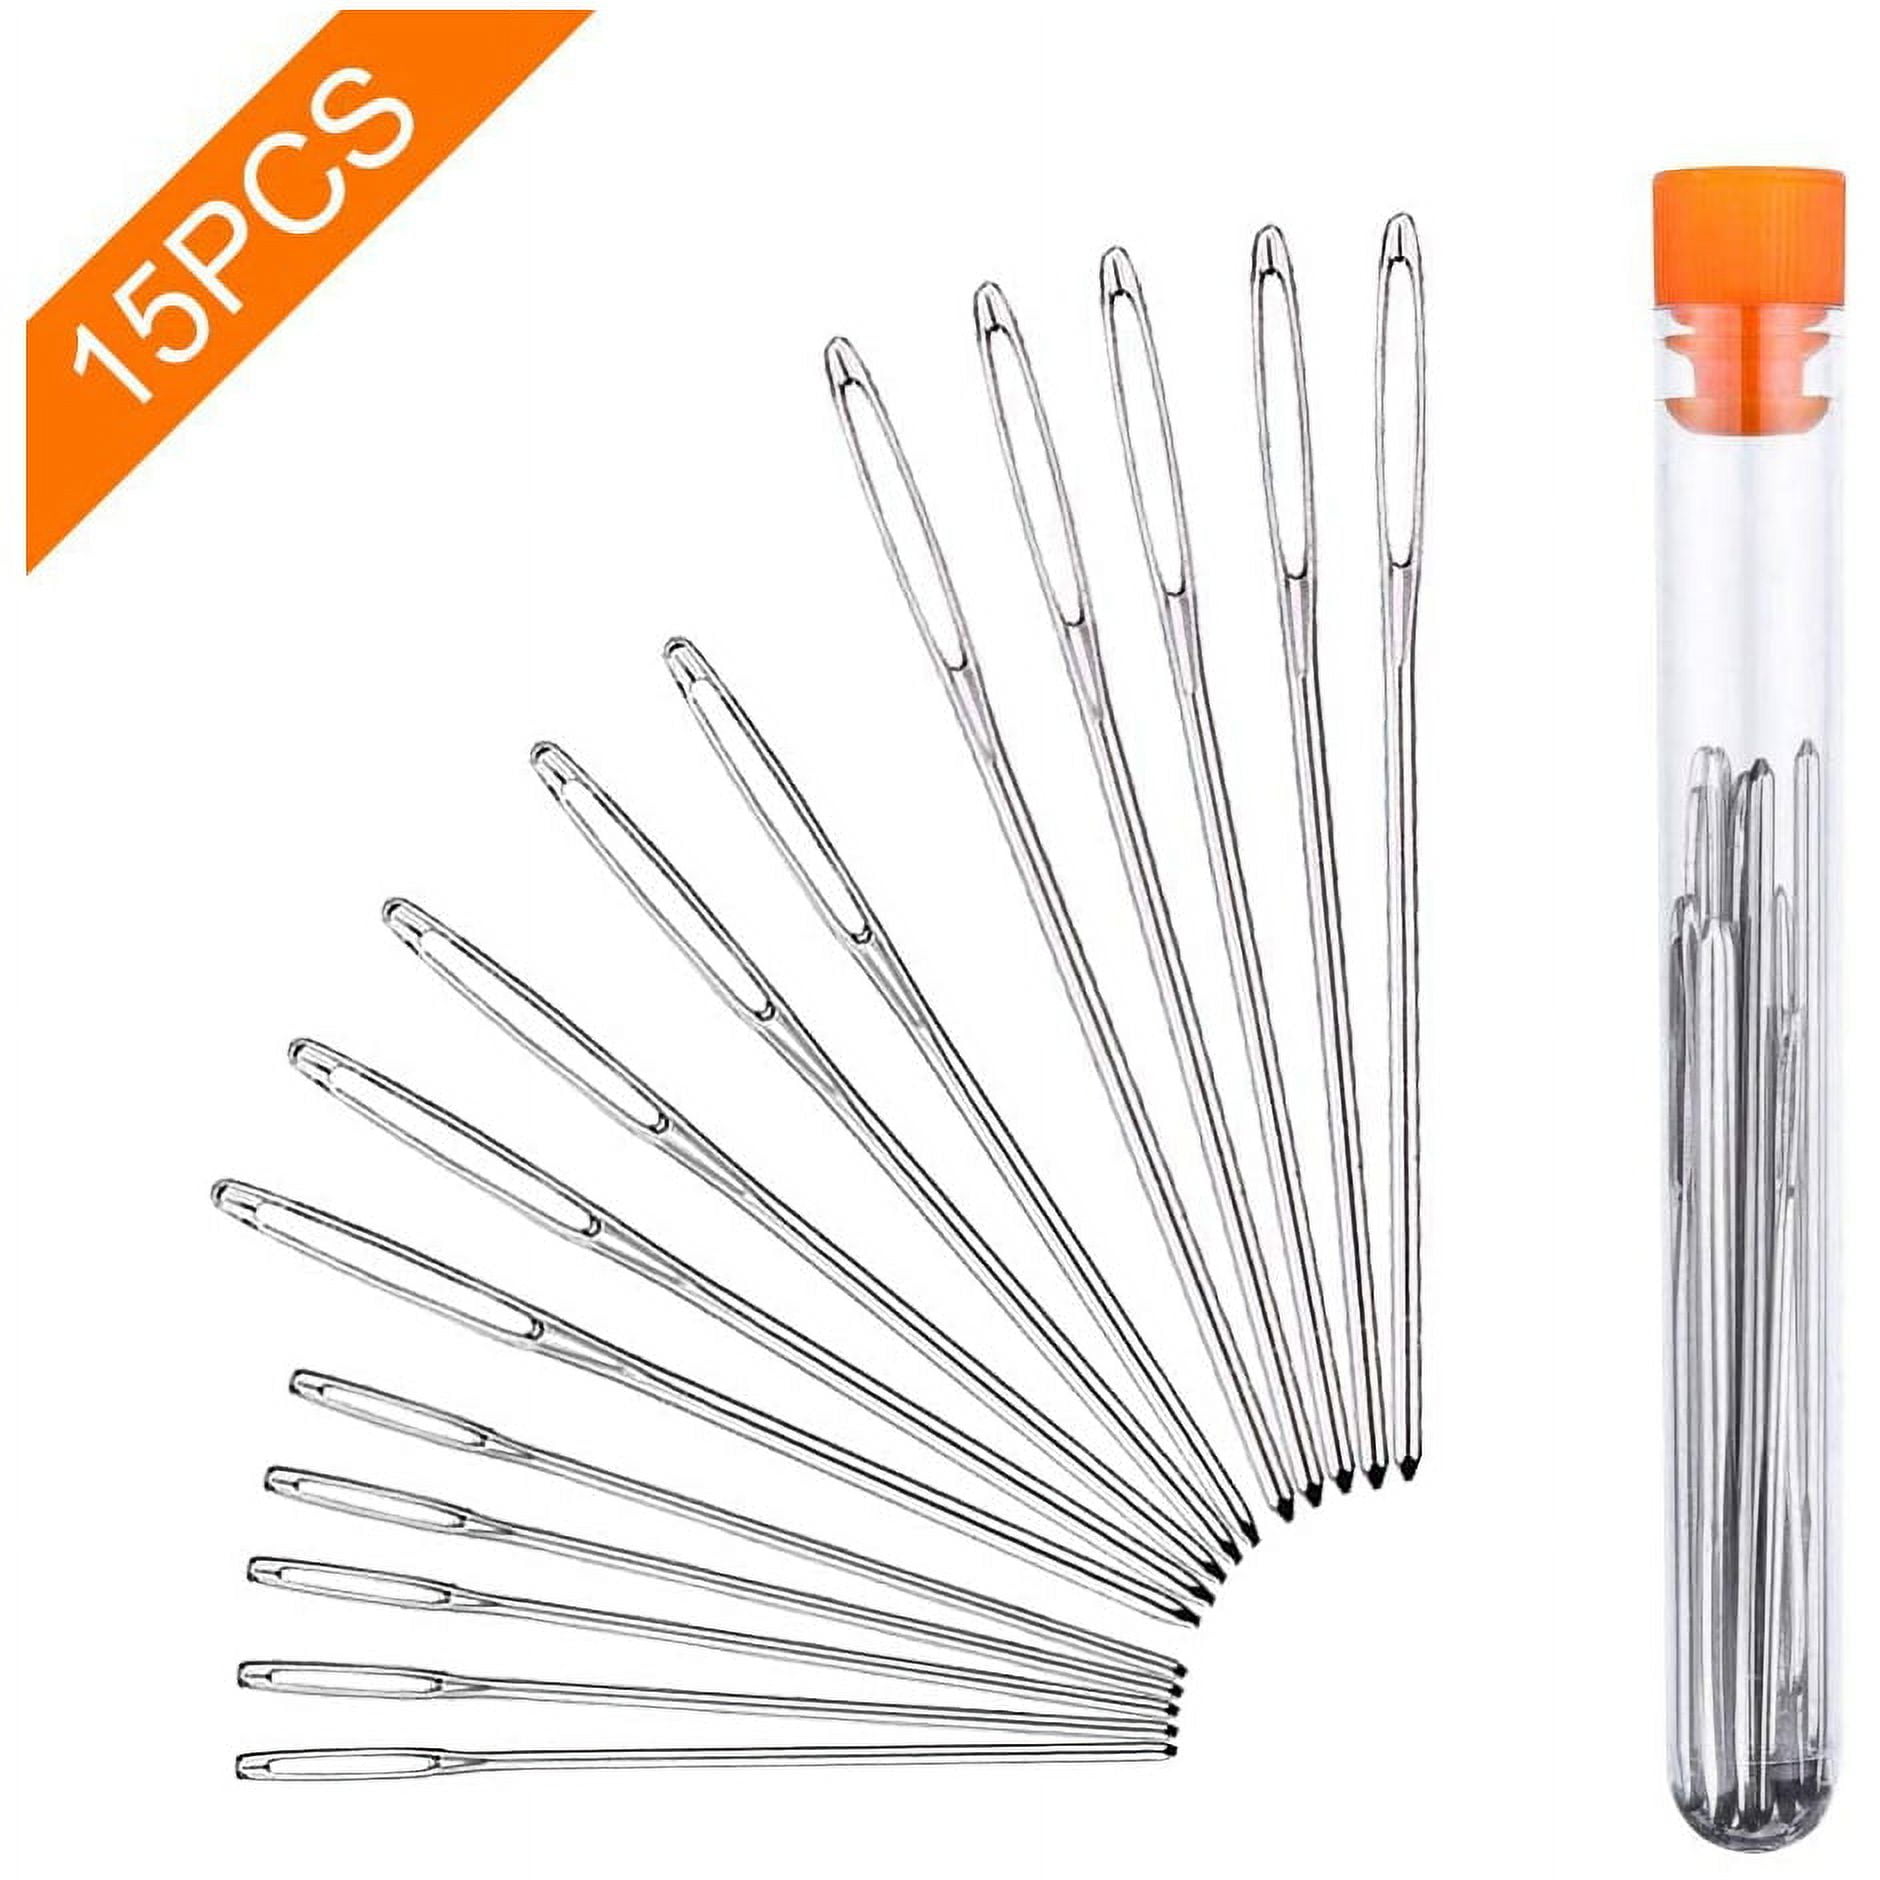 SewMates Steel Yarn Needles Set Large Eye Darning Needle With Clear Tube  For Knitting & Sewing Convenient Storage & Easy To Thread. From  Lijiehan2016, $0.52